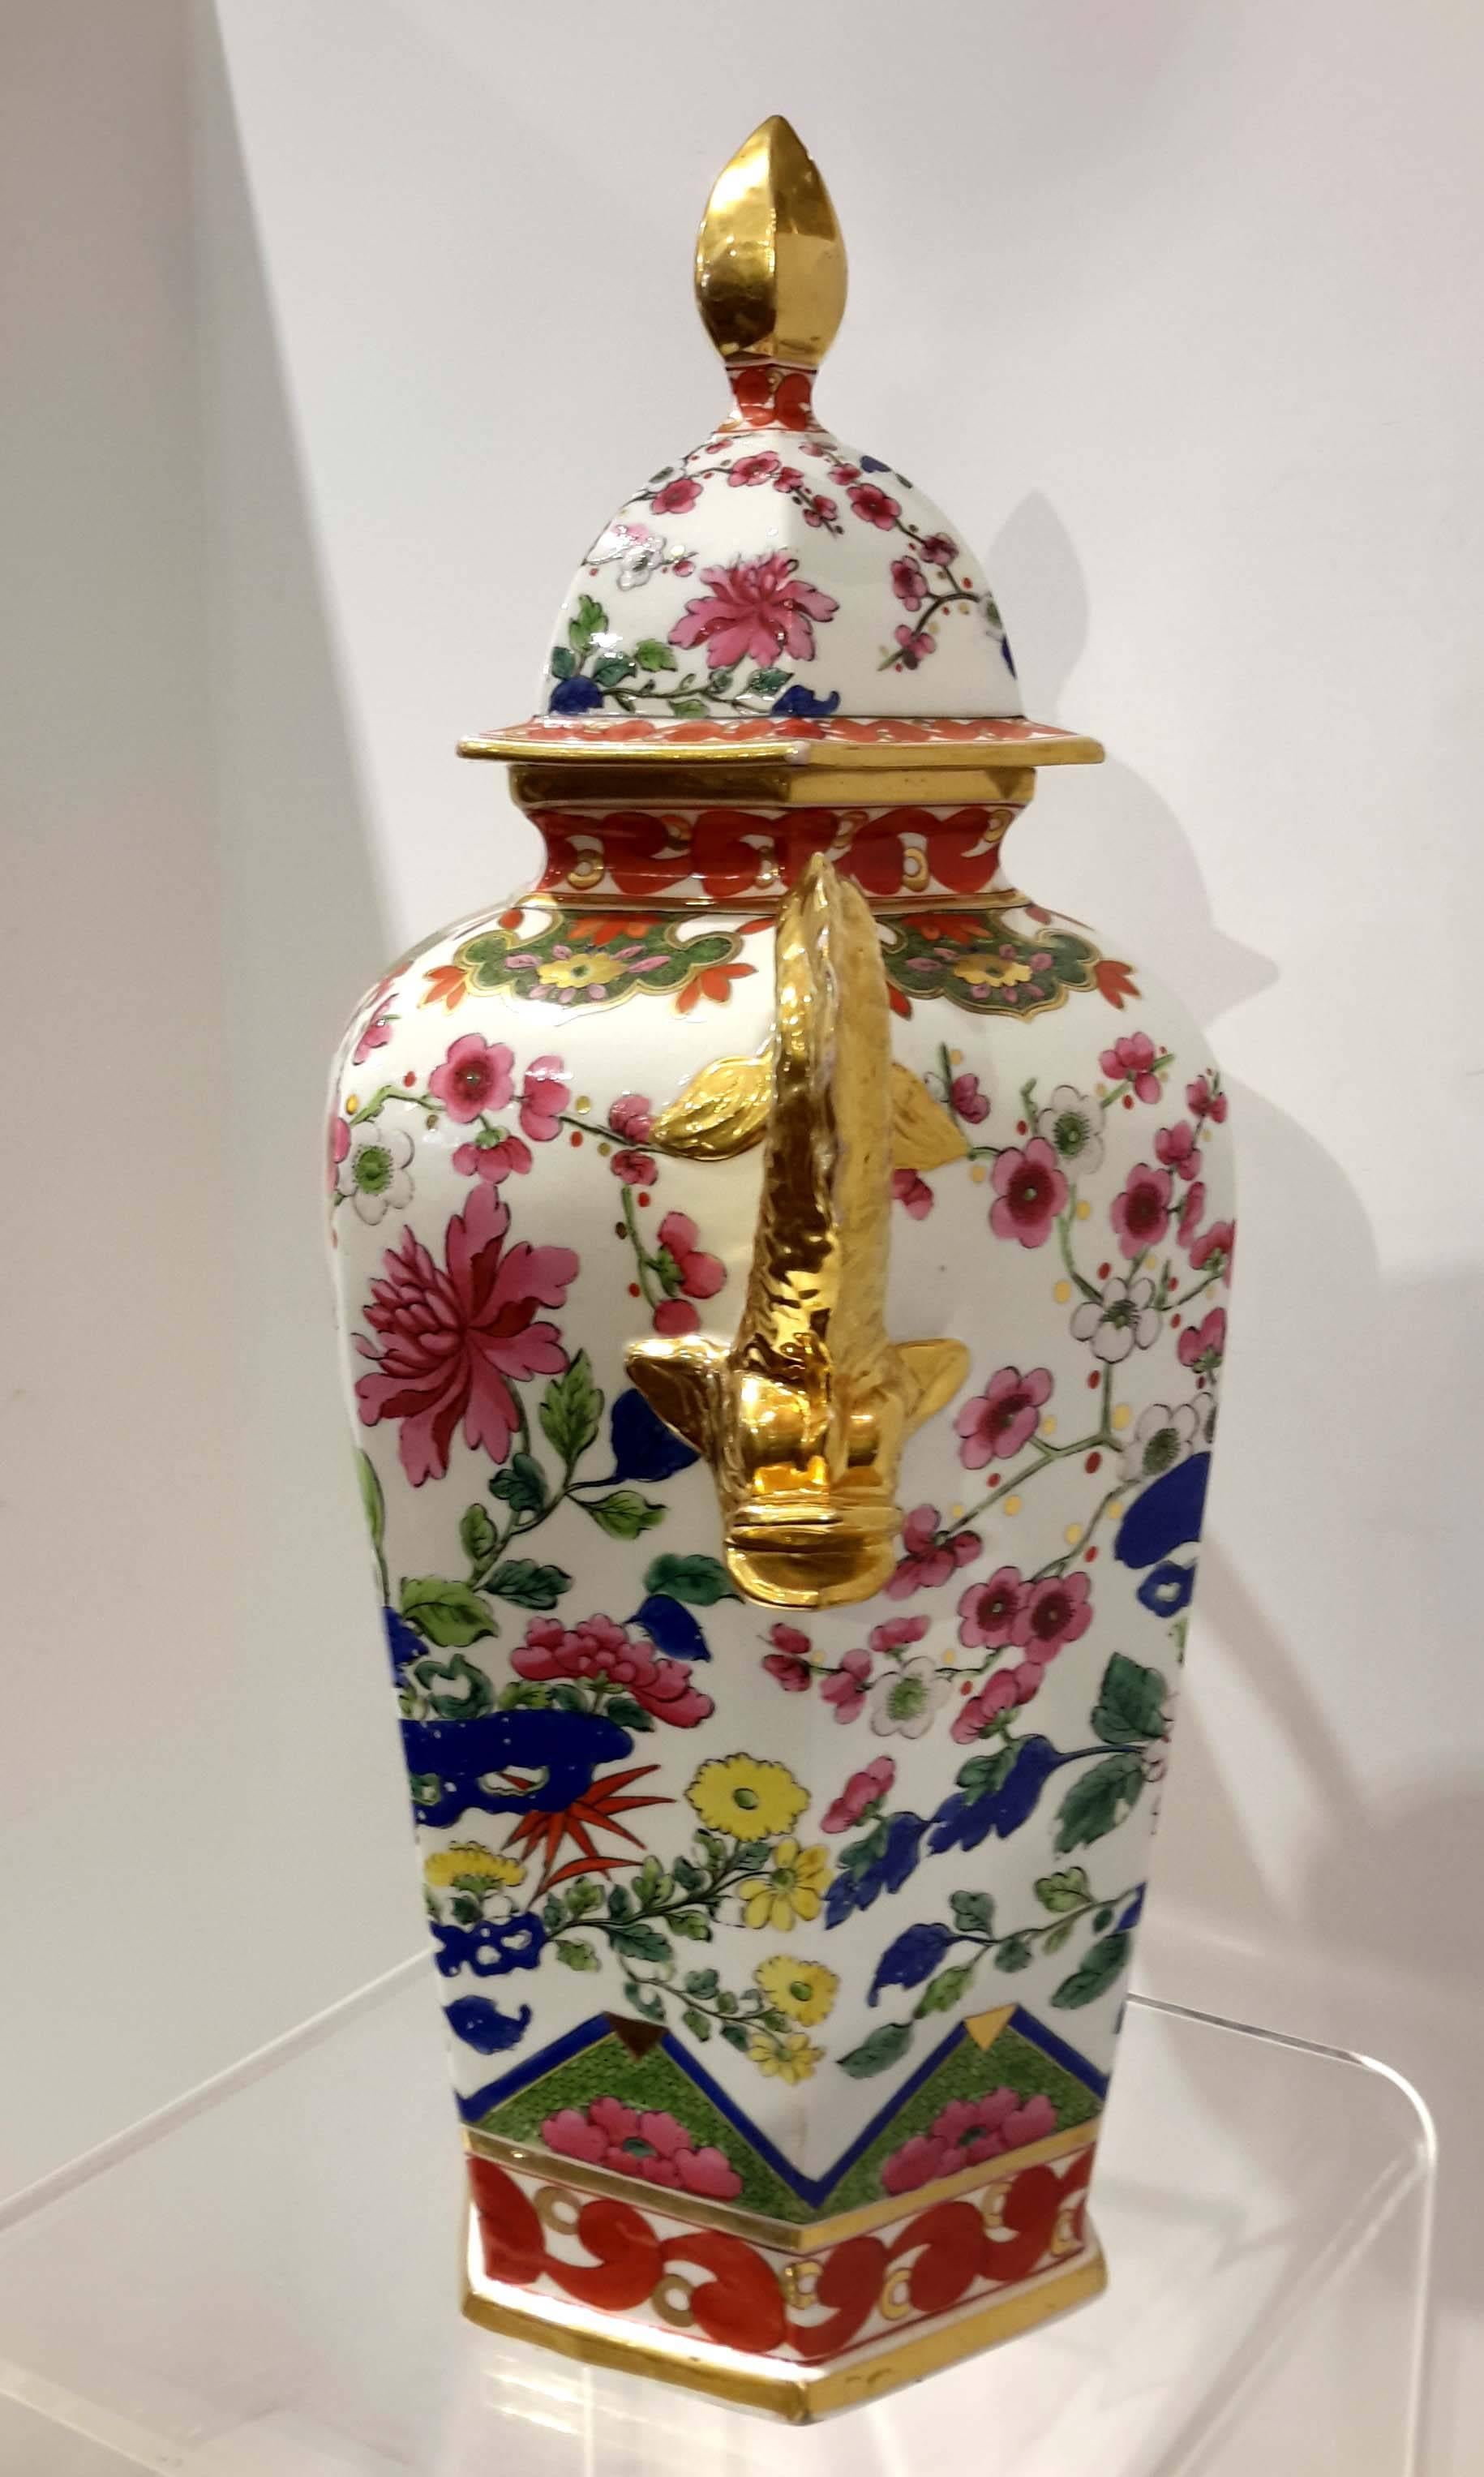 Hand-painted enamel decoration with burnished gilding, measures 21 inch.
This is a highly important and very rare vase.
Acquired in NYC from a private collection.
No restoration or damage.
Only some age related chips to the cobalt